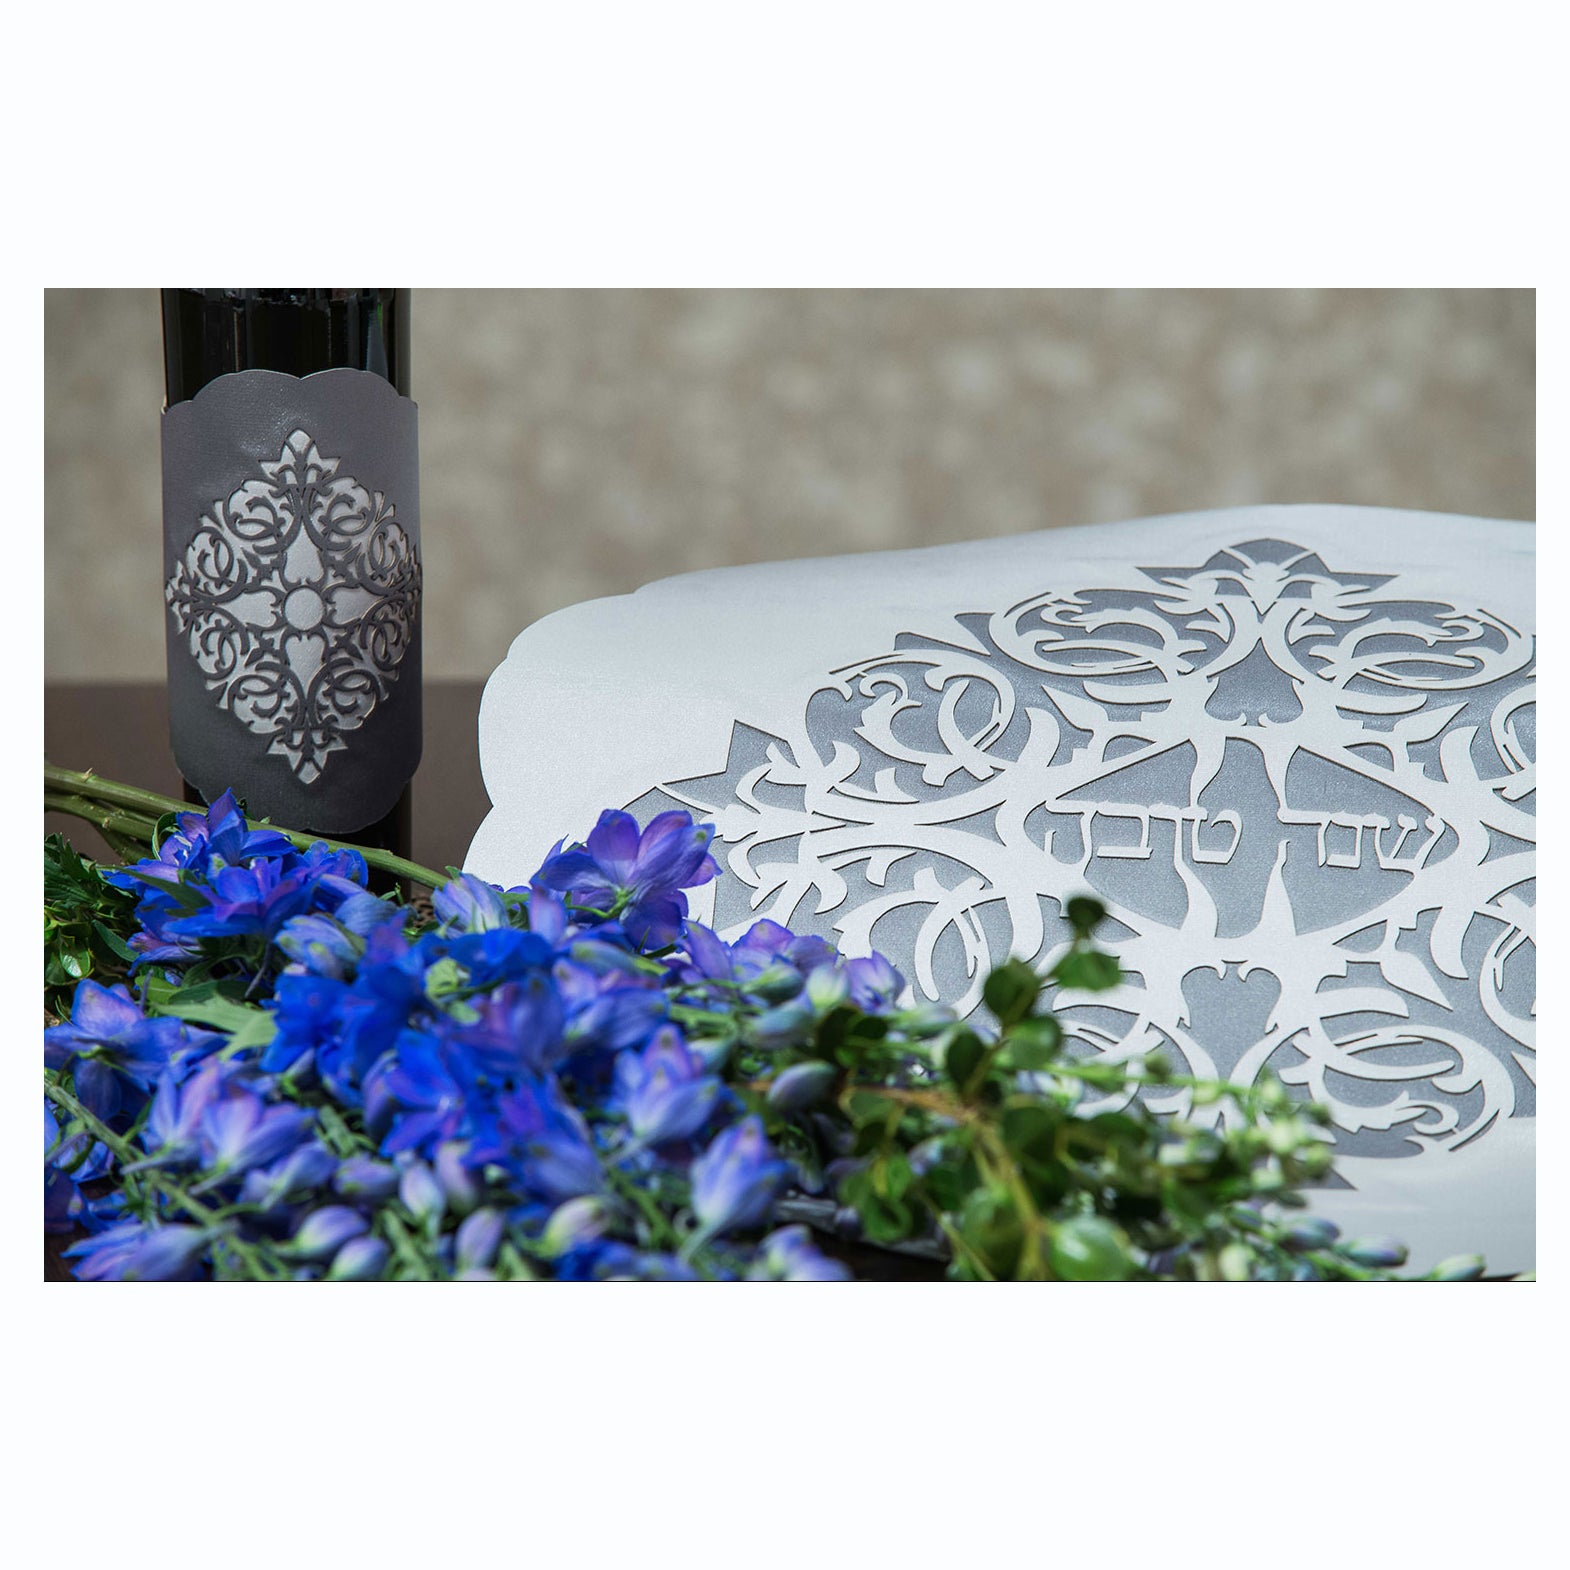 Mijal Geiser Judaica Challah Cover Matzah Cover Shabbat Cover Wine Cover Laser Cut Designs in Synthetic Silk Shabbat Shalom Passover and Rosh Hashanah